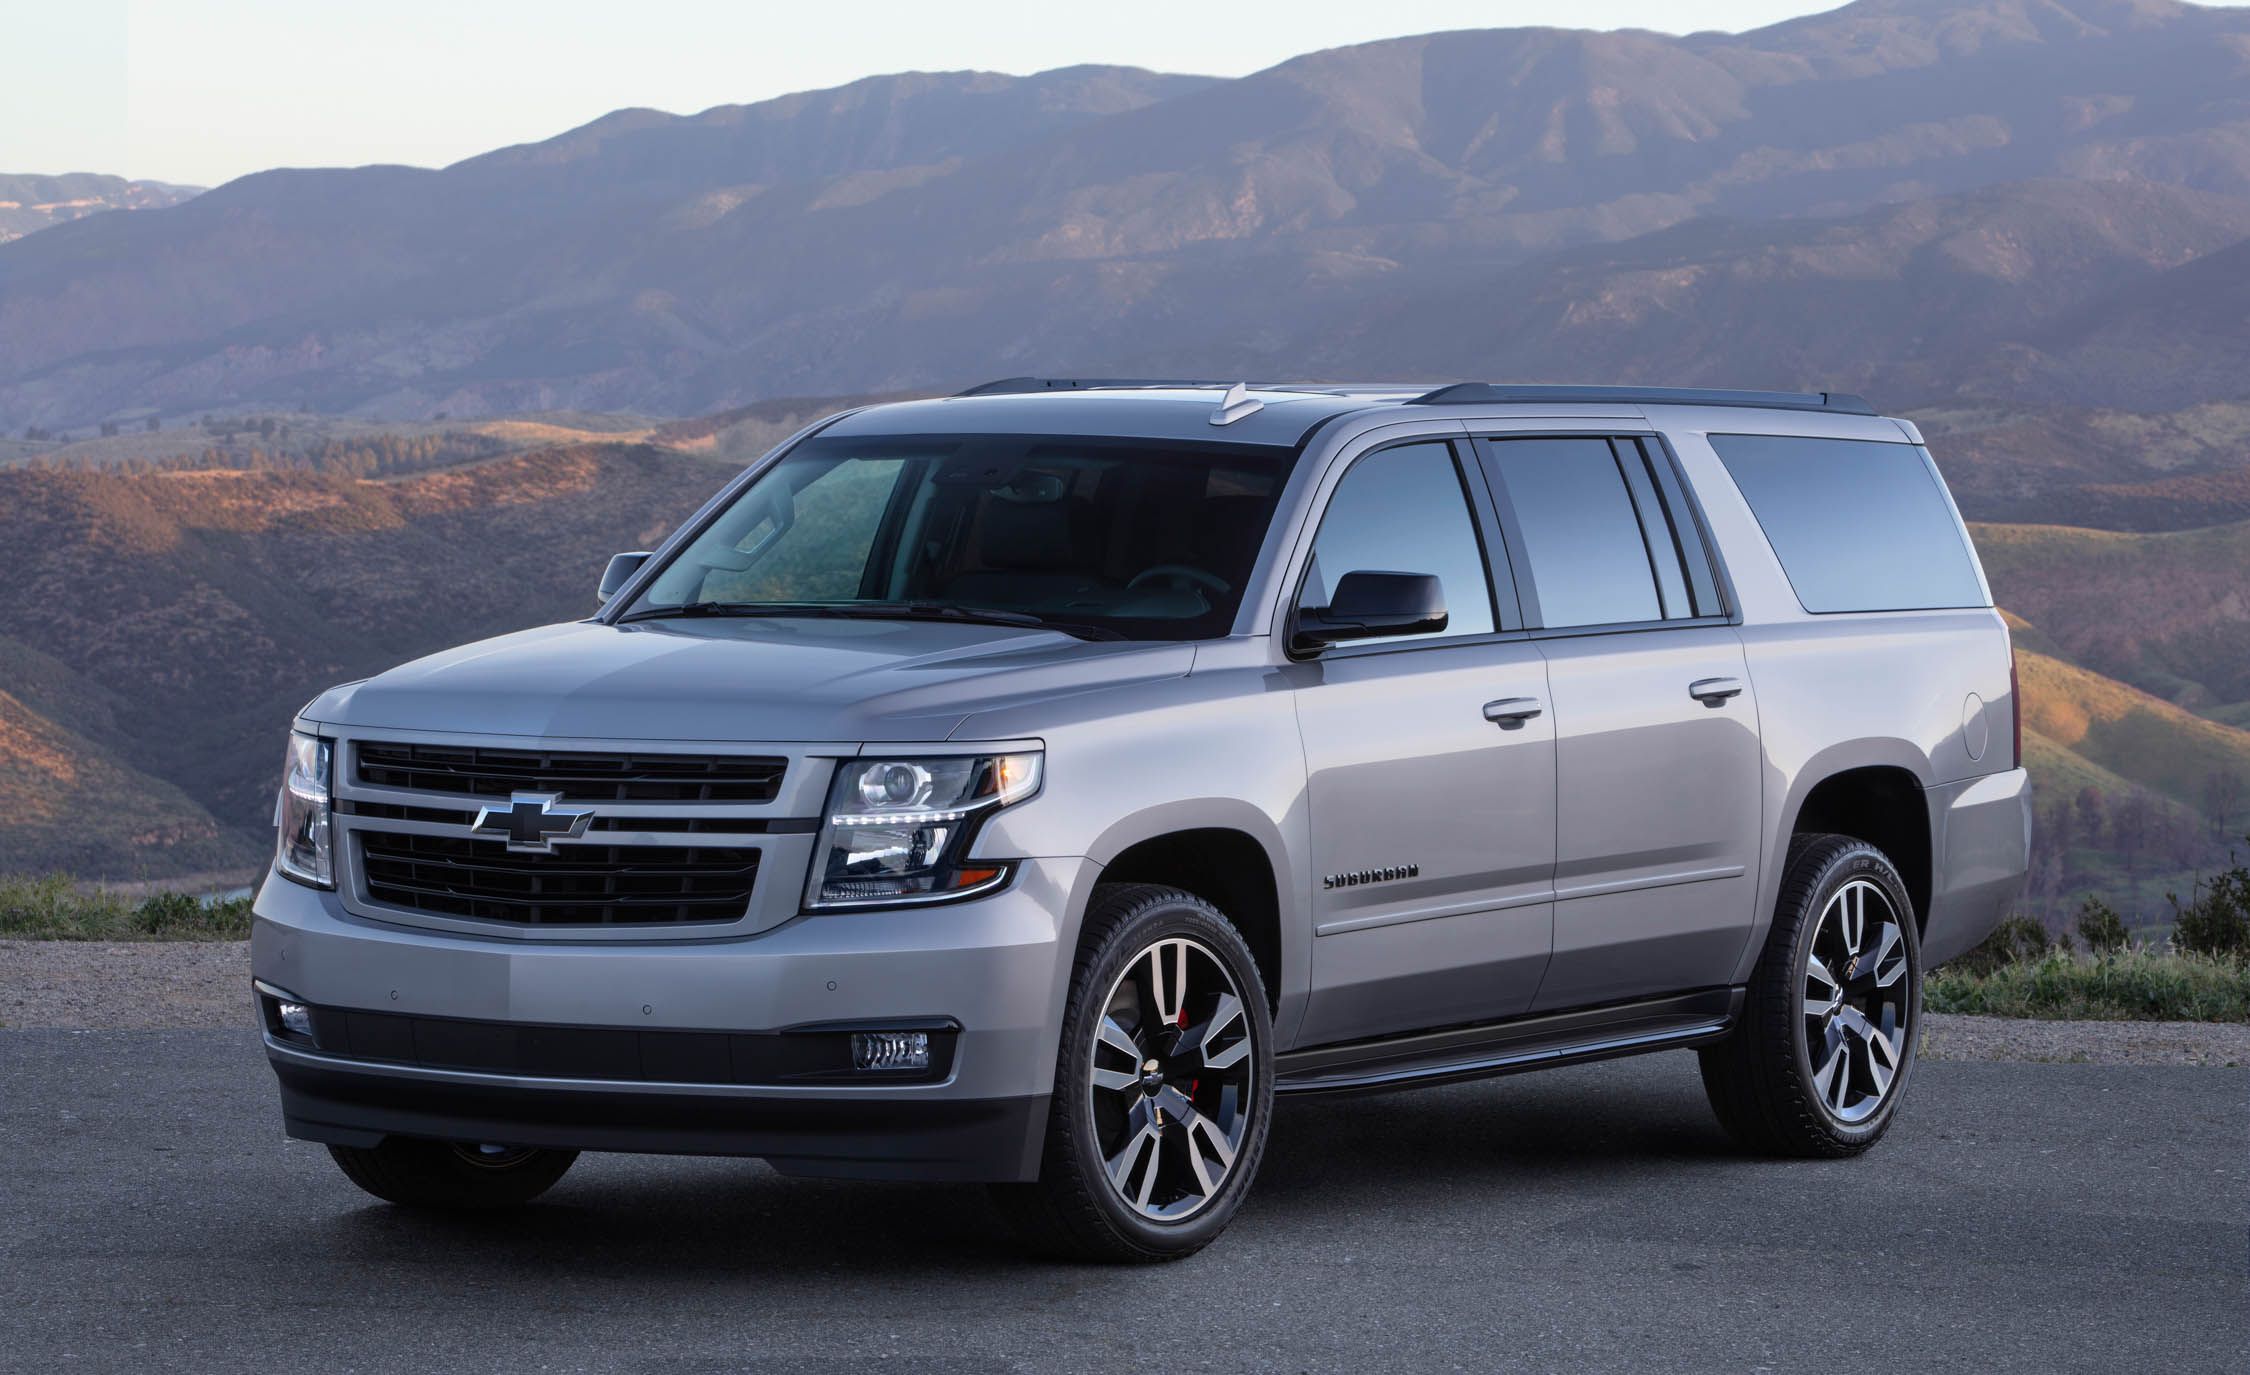 2019 Chevy Suburban Rst Adds 6 2l Engine